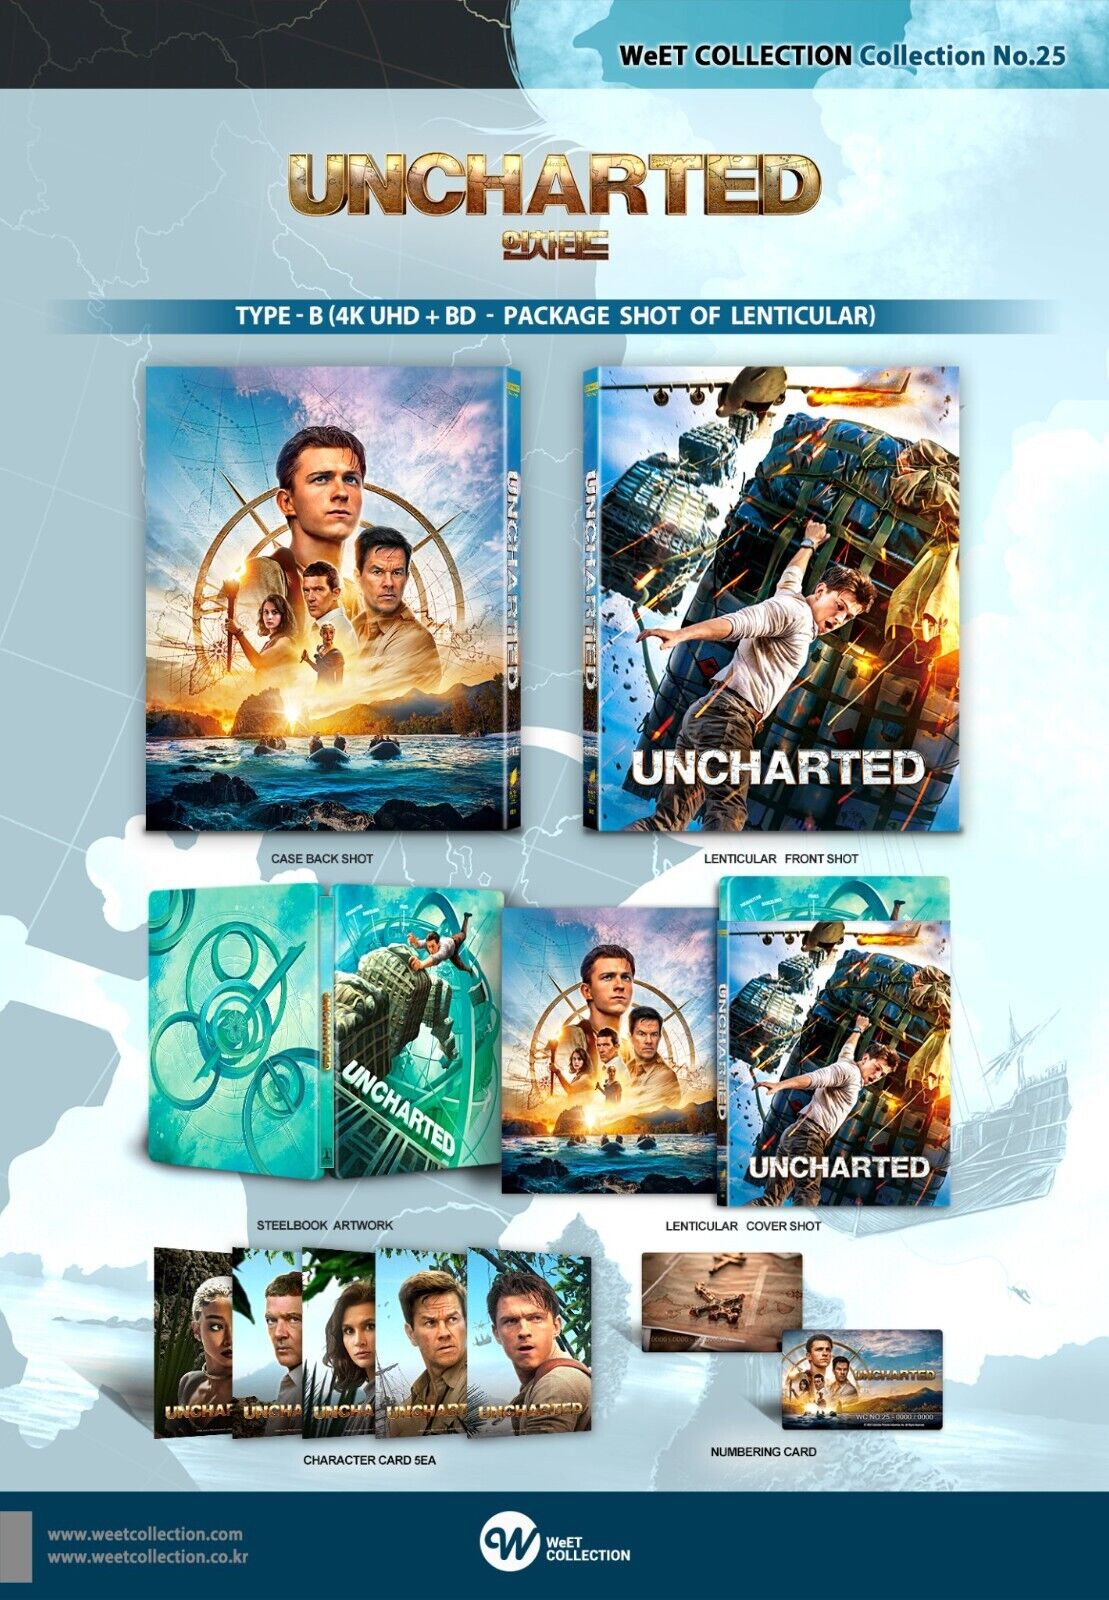 Uncharted 4K Blu-Ray Steelbook WeET Collection Collection #25 Lenticular Slip